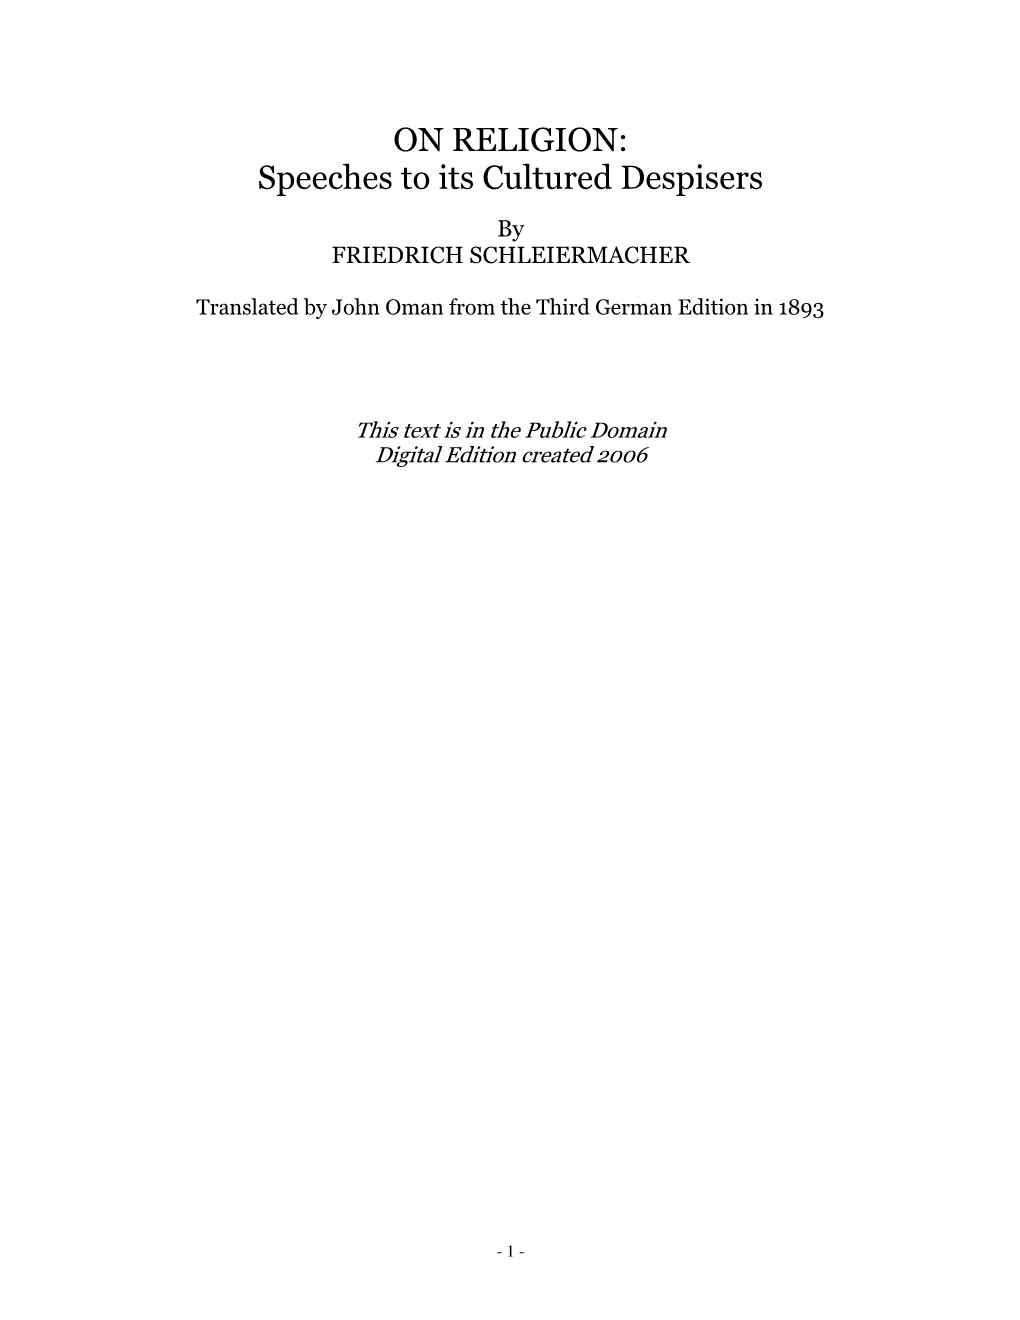 ON RELIGION: Speeches to Its Cultured Despisers